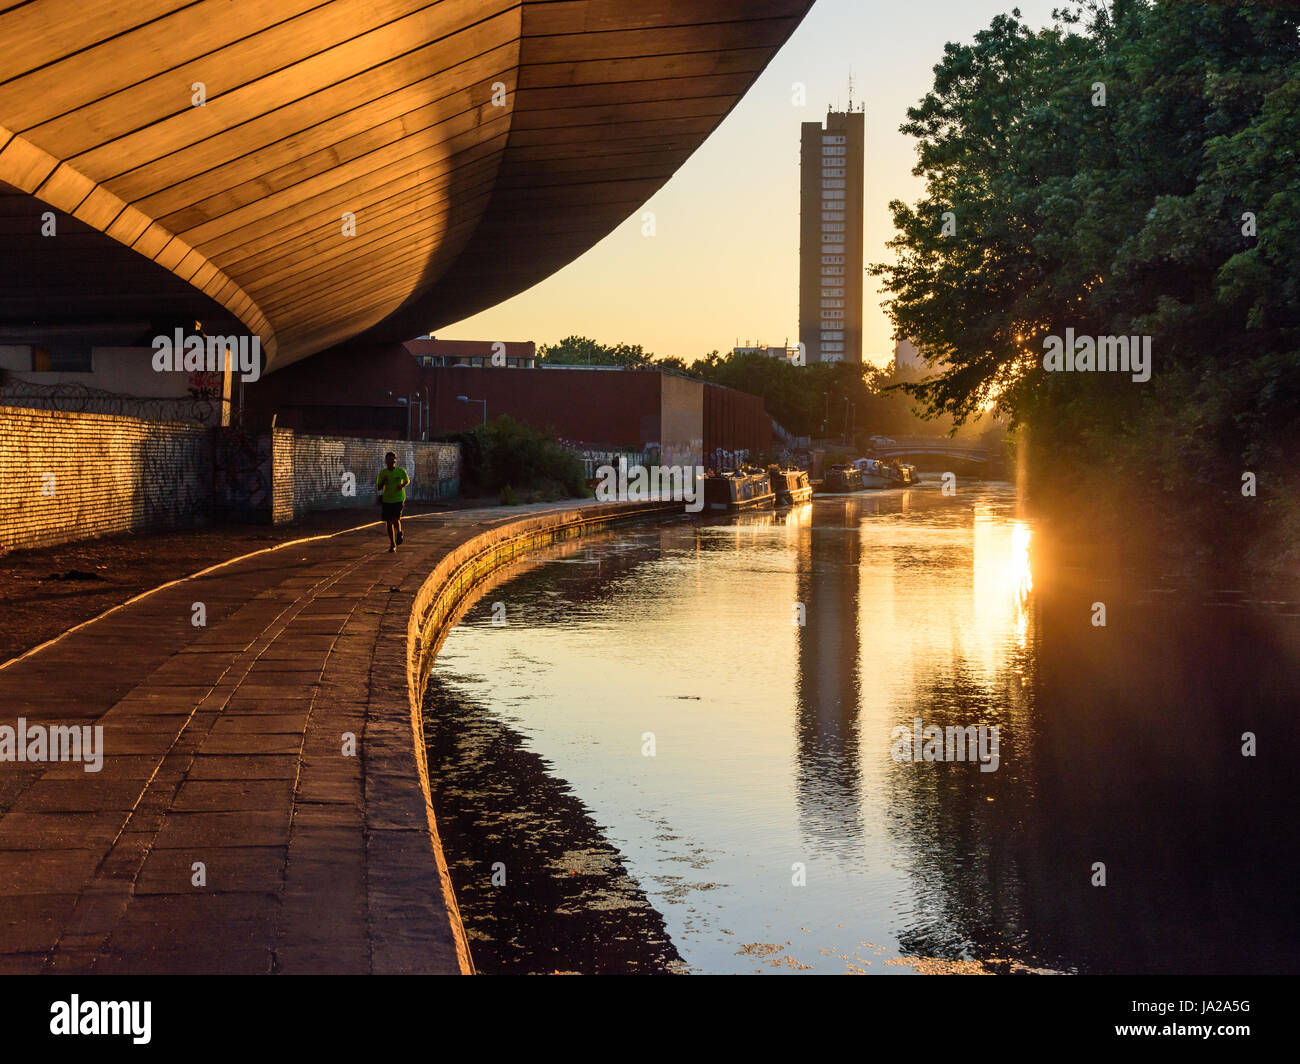 London, England - July 19, 2016: The Trellick Tower housing block and Westway road flyover are reflected in the waters of the Grand Union Canal at sun Stock Photo